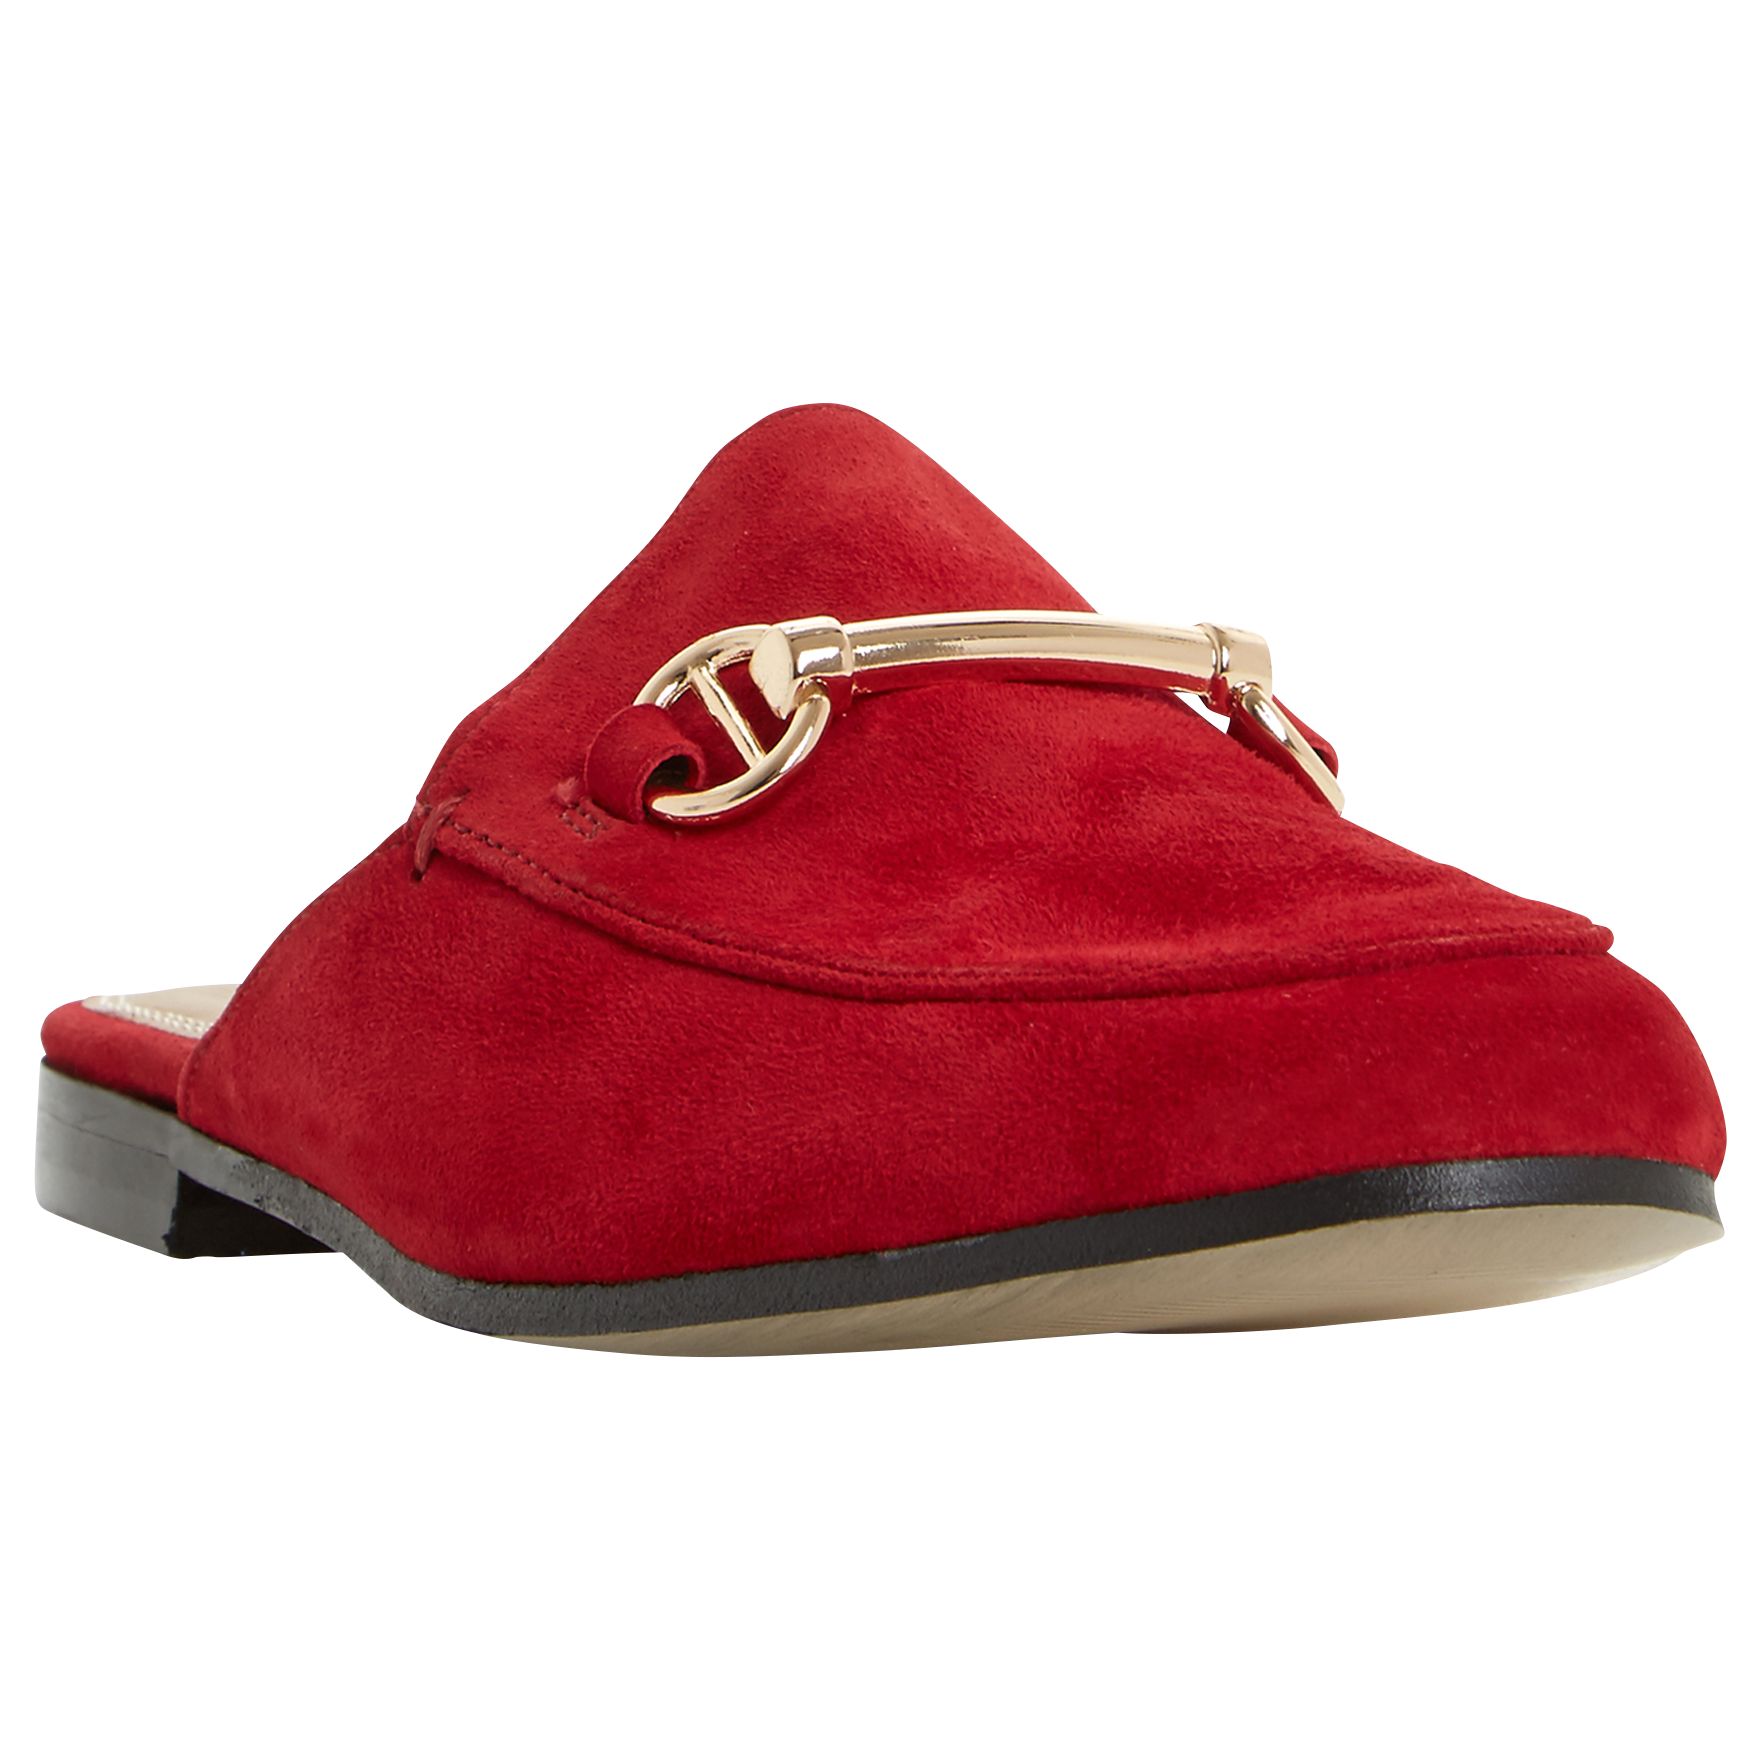 Dune Gene Backless Loafers, Red Suede 